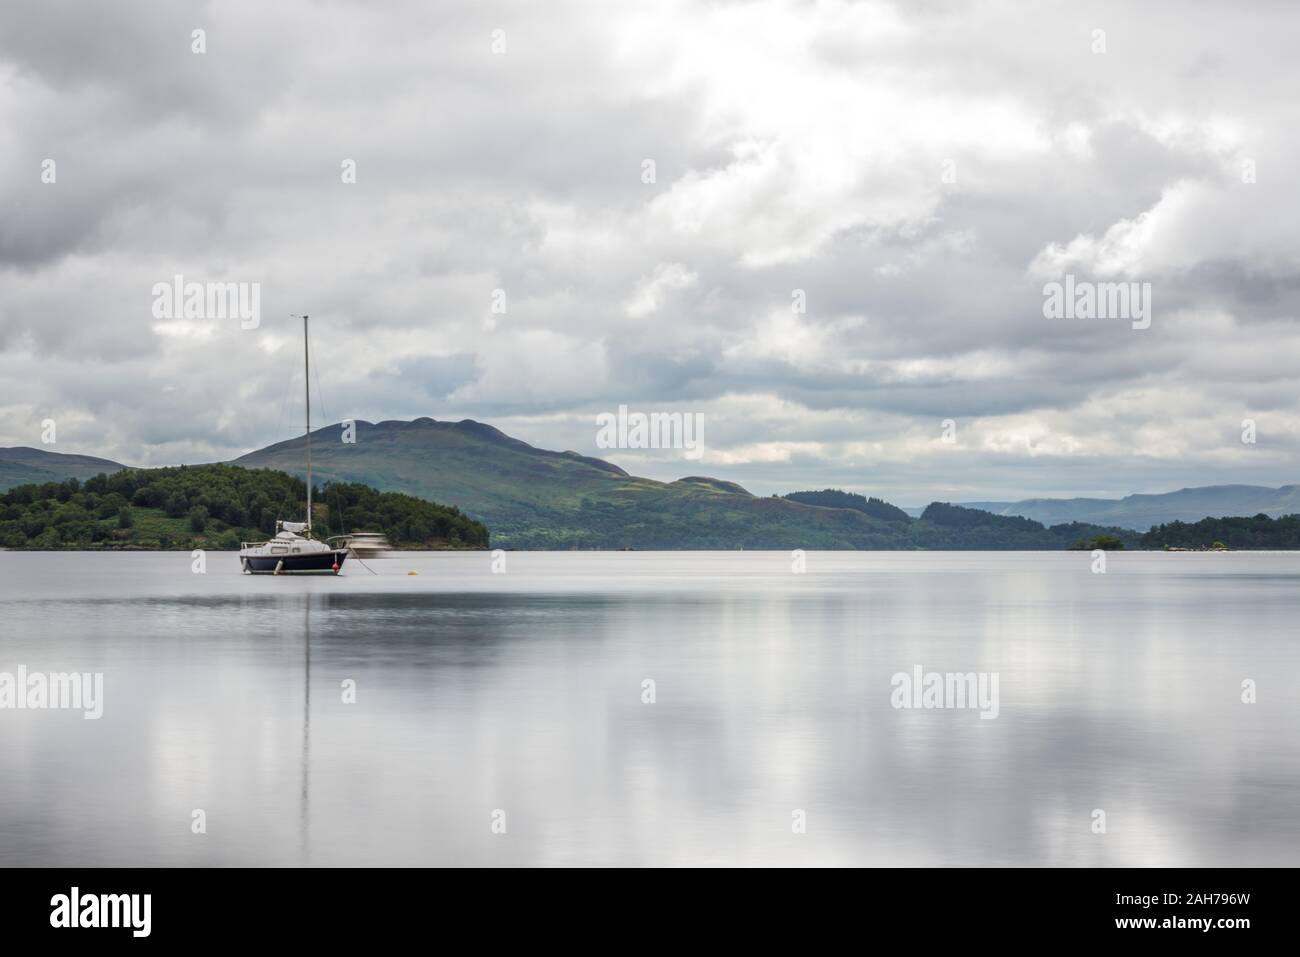 A scottish lake surrounded by trees and vegetation with a sailboat in the middle and distant mountains in the background, under a cloudy sky Stock Photo